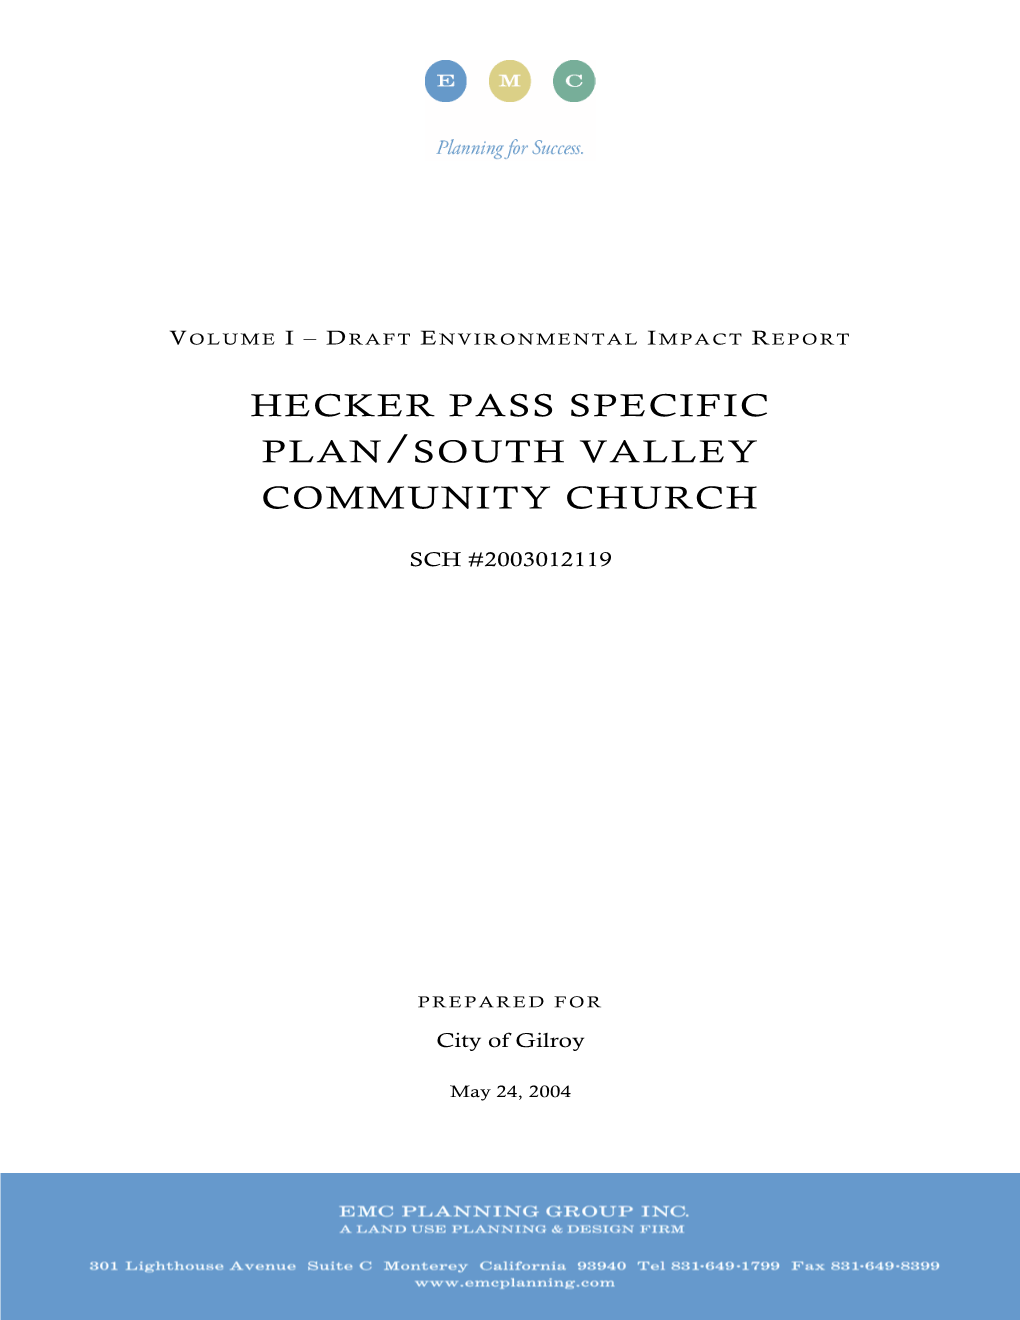 Hecker Pass Specific Plan/South Valley Community Church